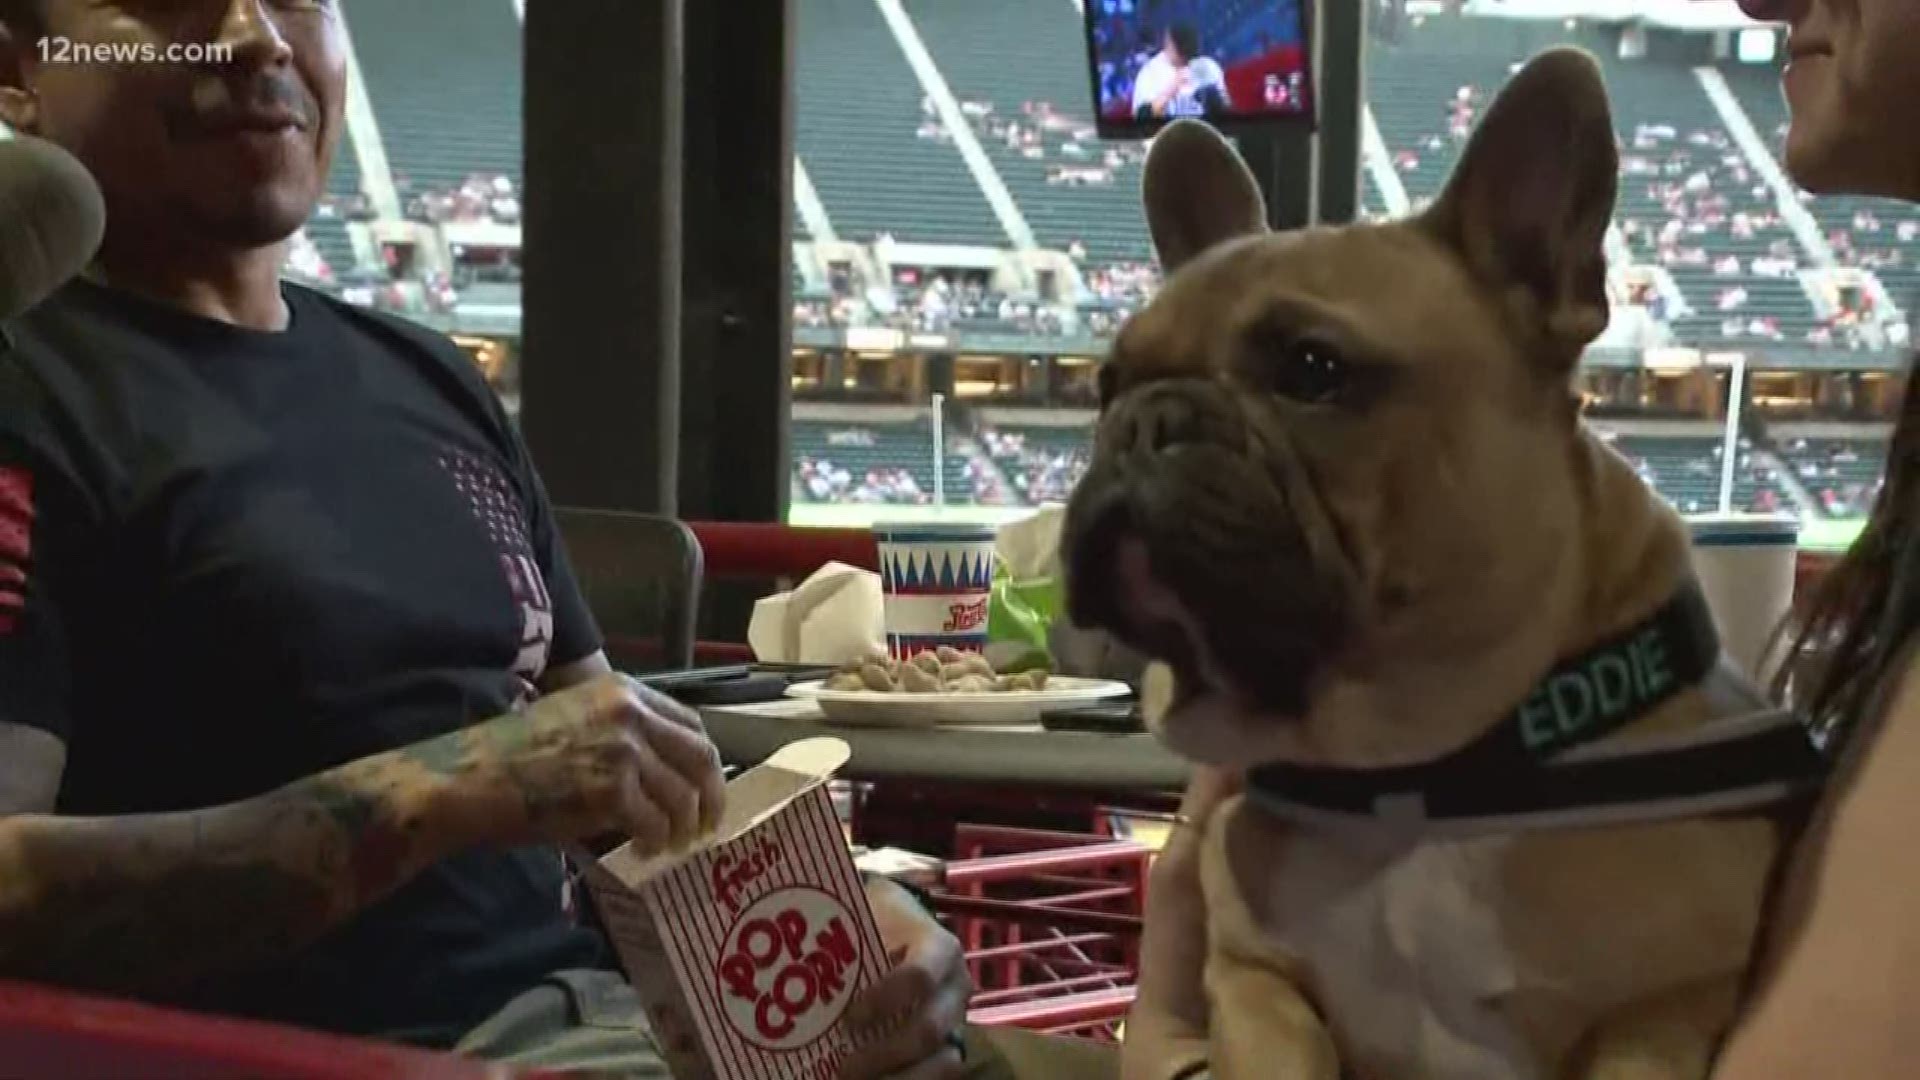 Fans were allowed to bring dogs to Chase Field Friday night for Bark at the Park. But if you missed out, it's not the only time this season.